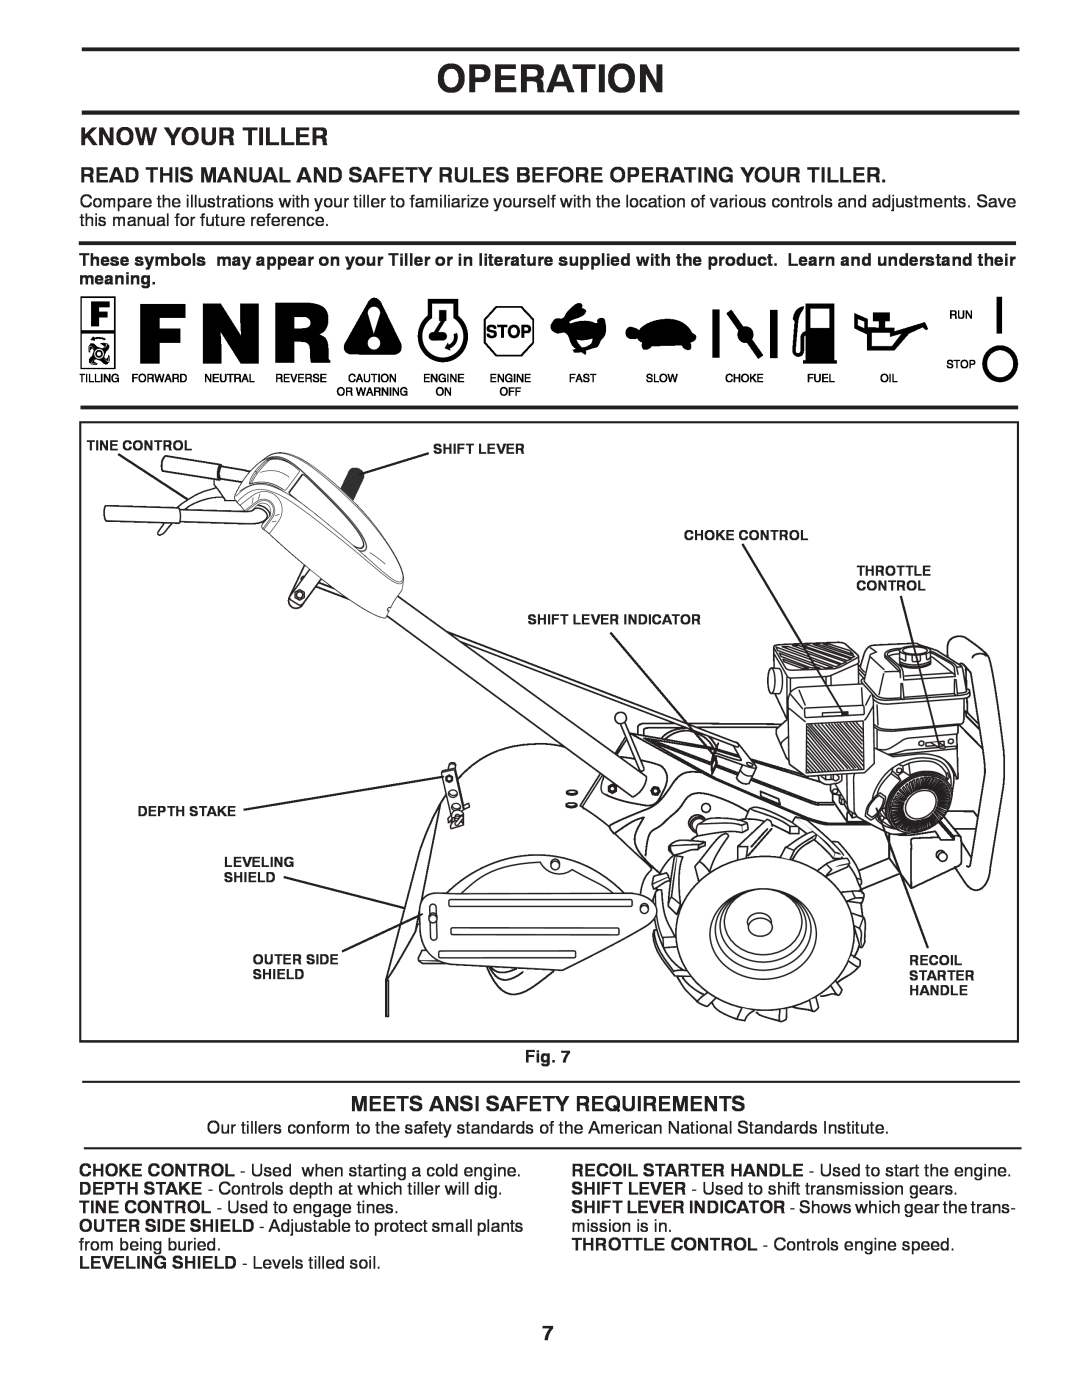 Poulan PRRT9000 warranty Operation, Know Your Tiller, Read This Manual And Safety Rules Before Operating Your Tiller 